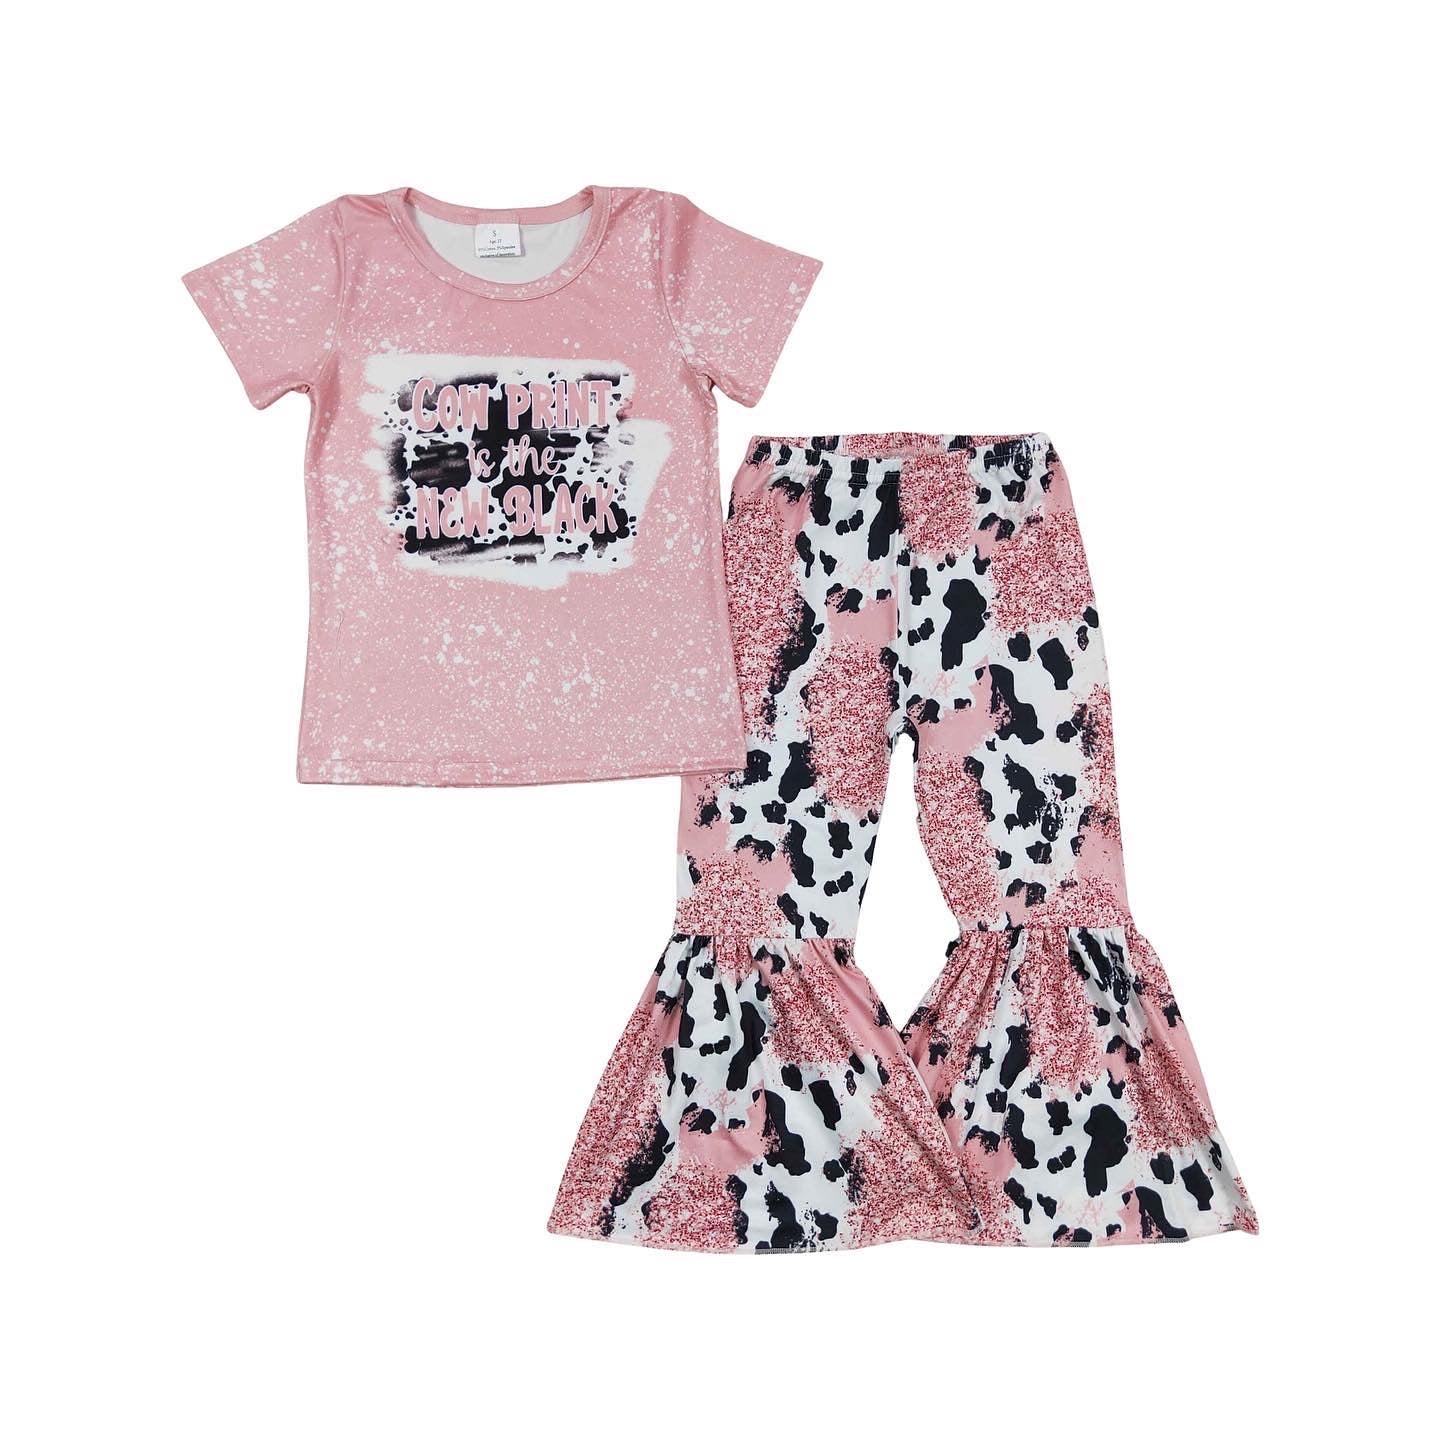 Cow Print Is The New Black Set